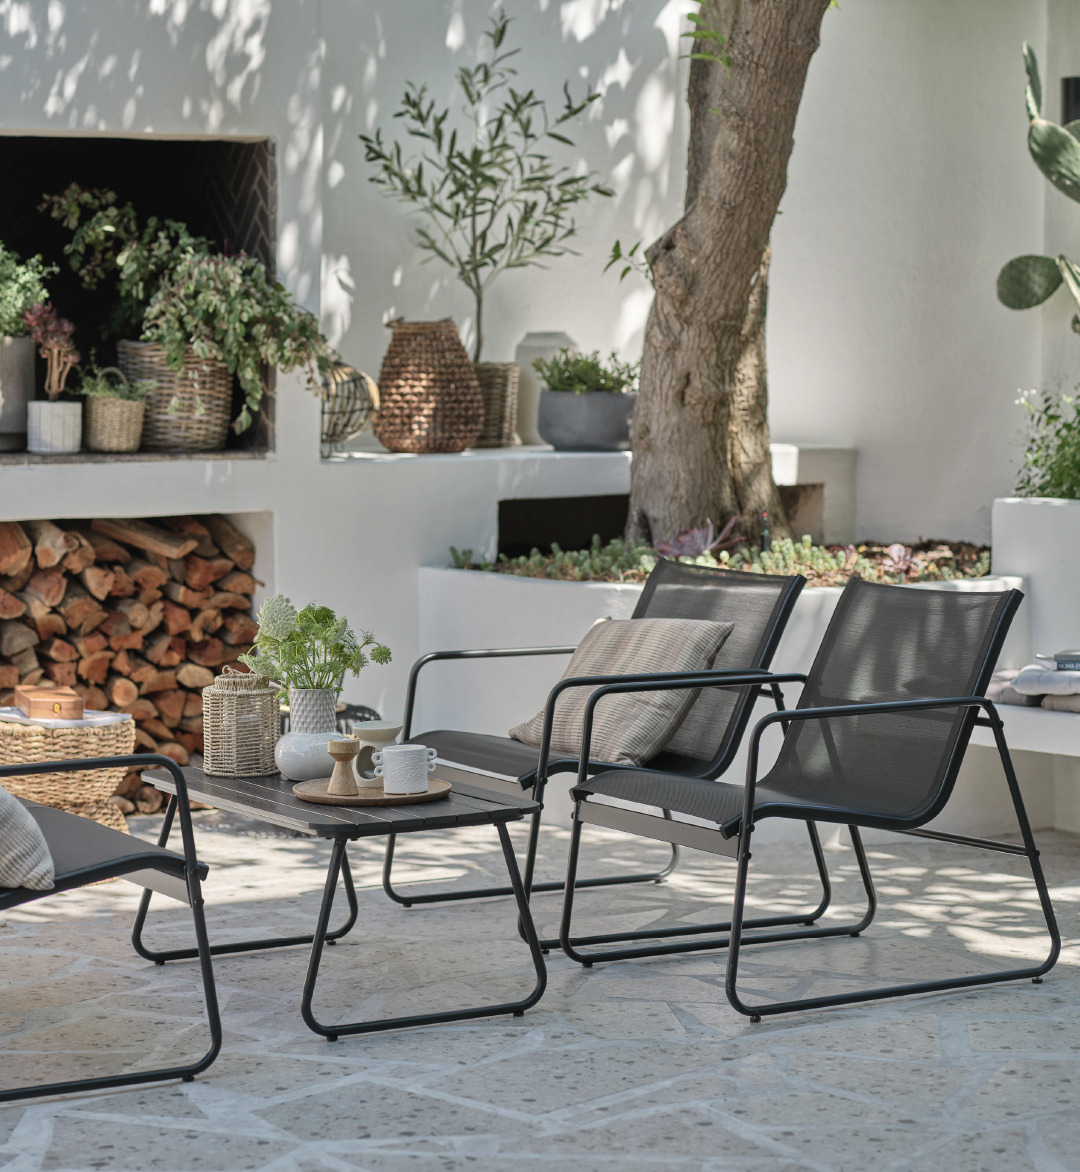  Black outdoor lounge set with 4 chairs